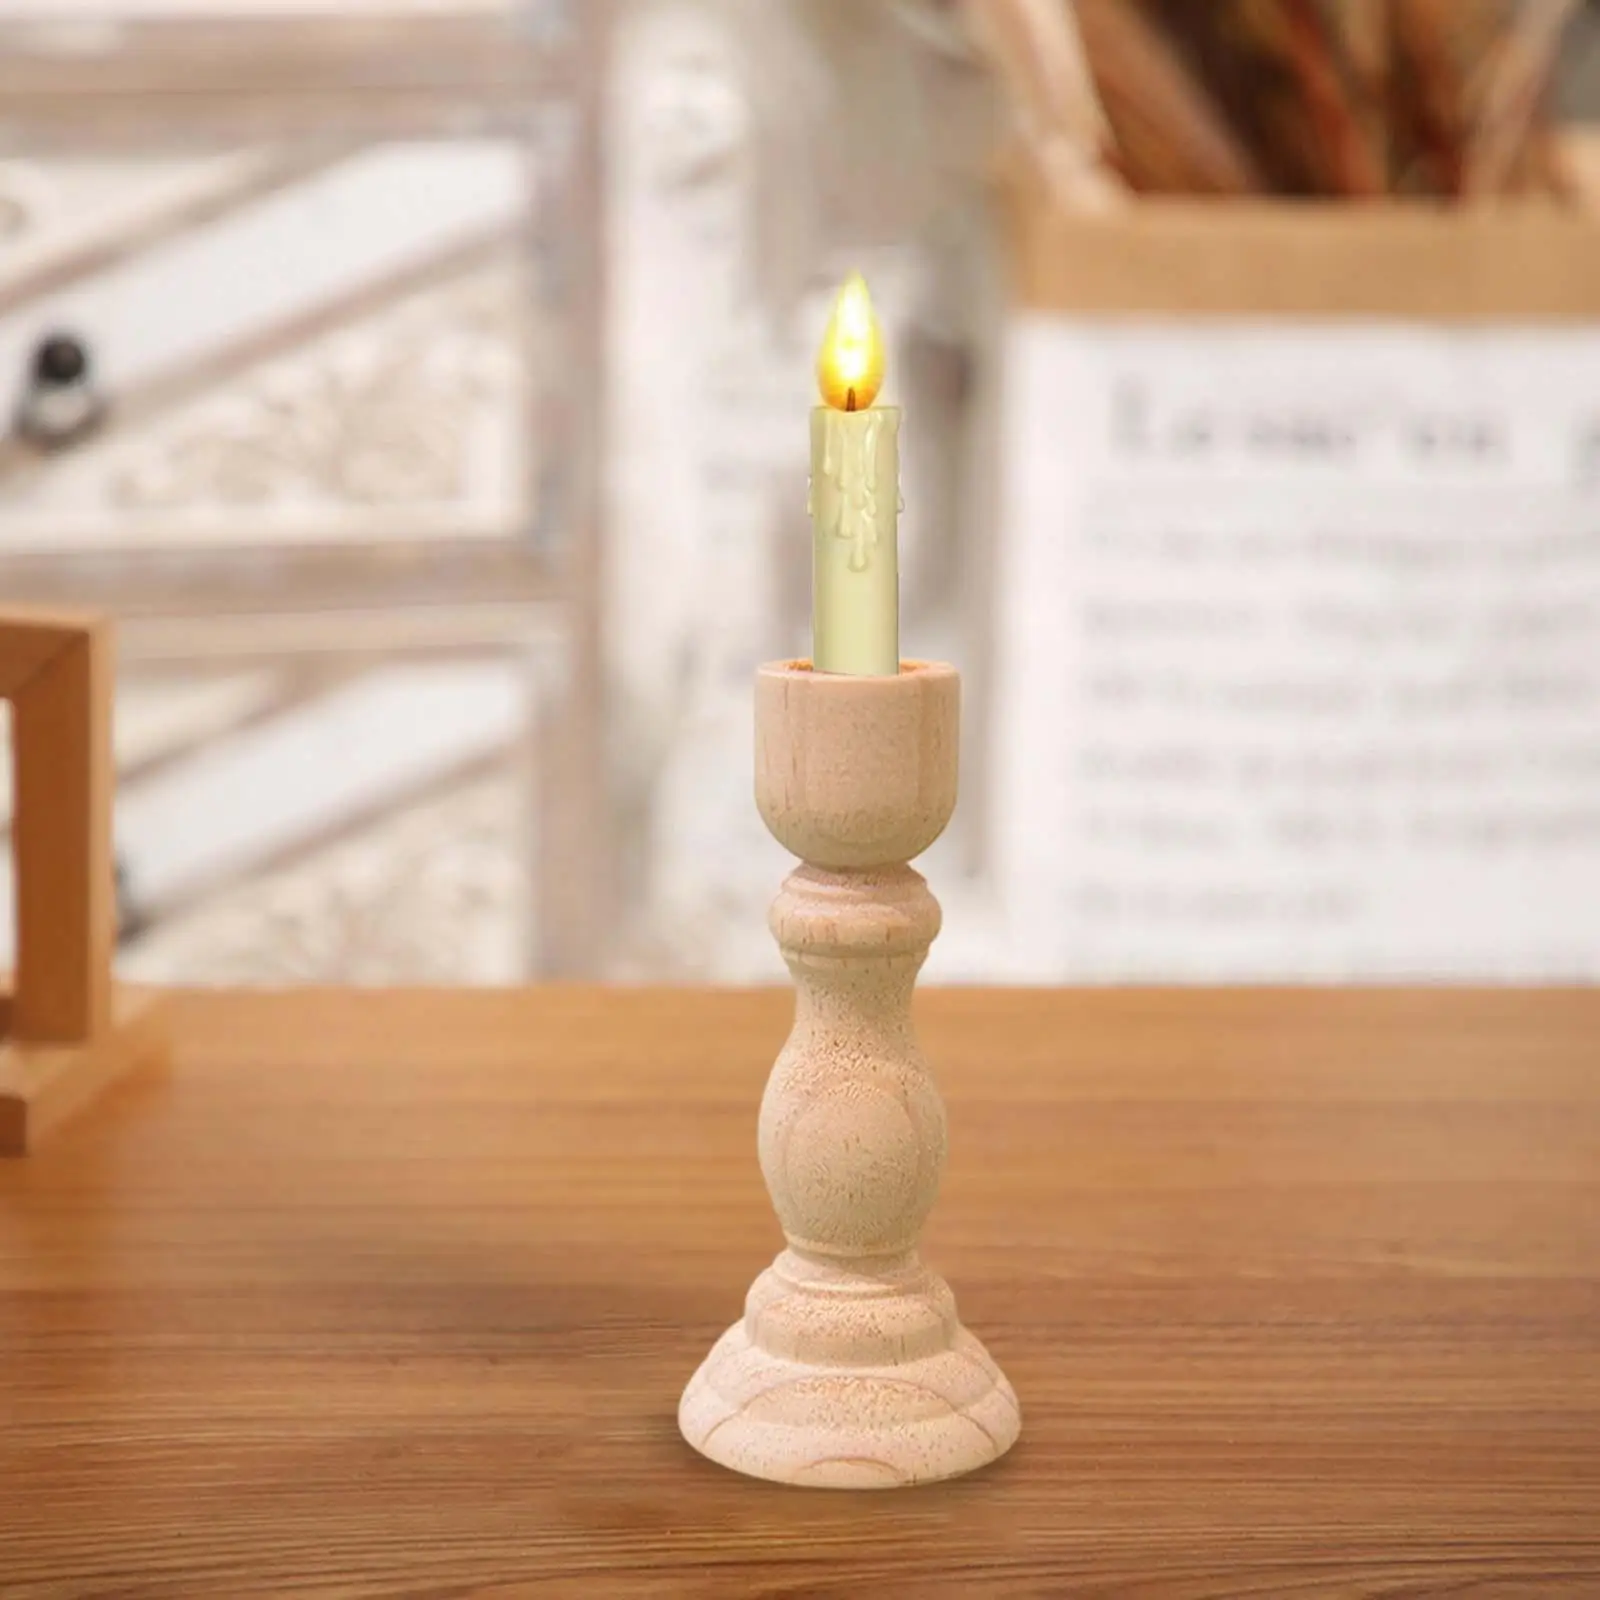 Pillar Candle Tray Table Centerpiece Photo Props Candlestick Home Decoration for Home Thanksgiving Wedding Living Room Decor